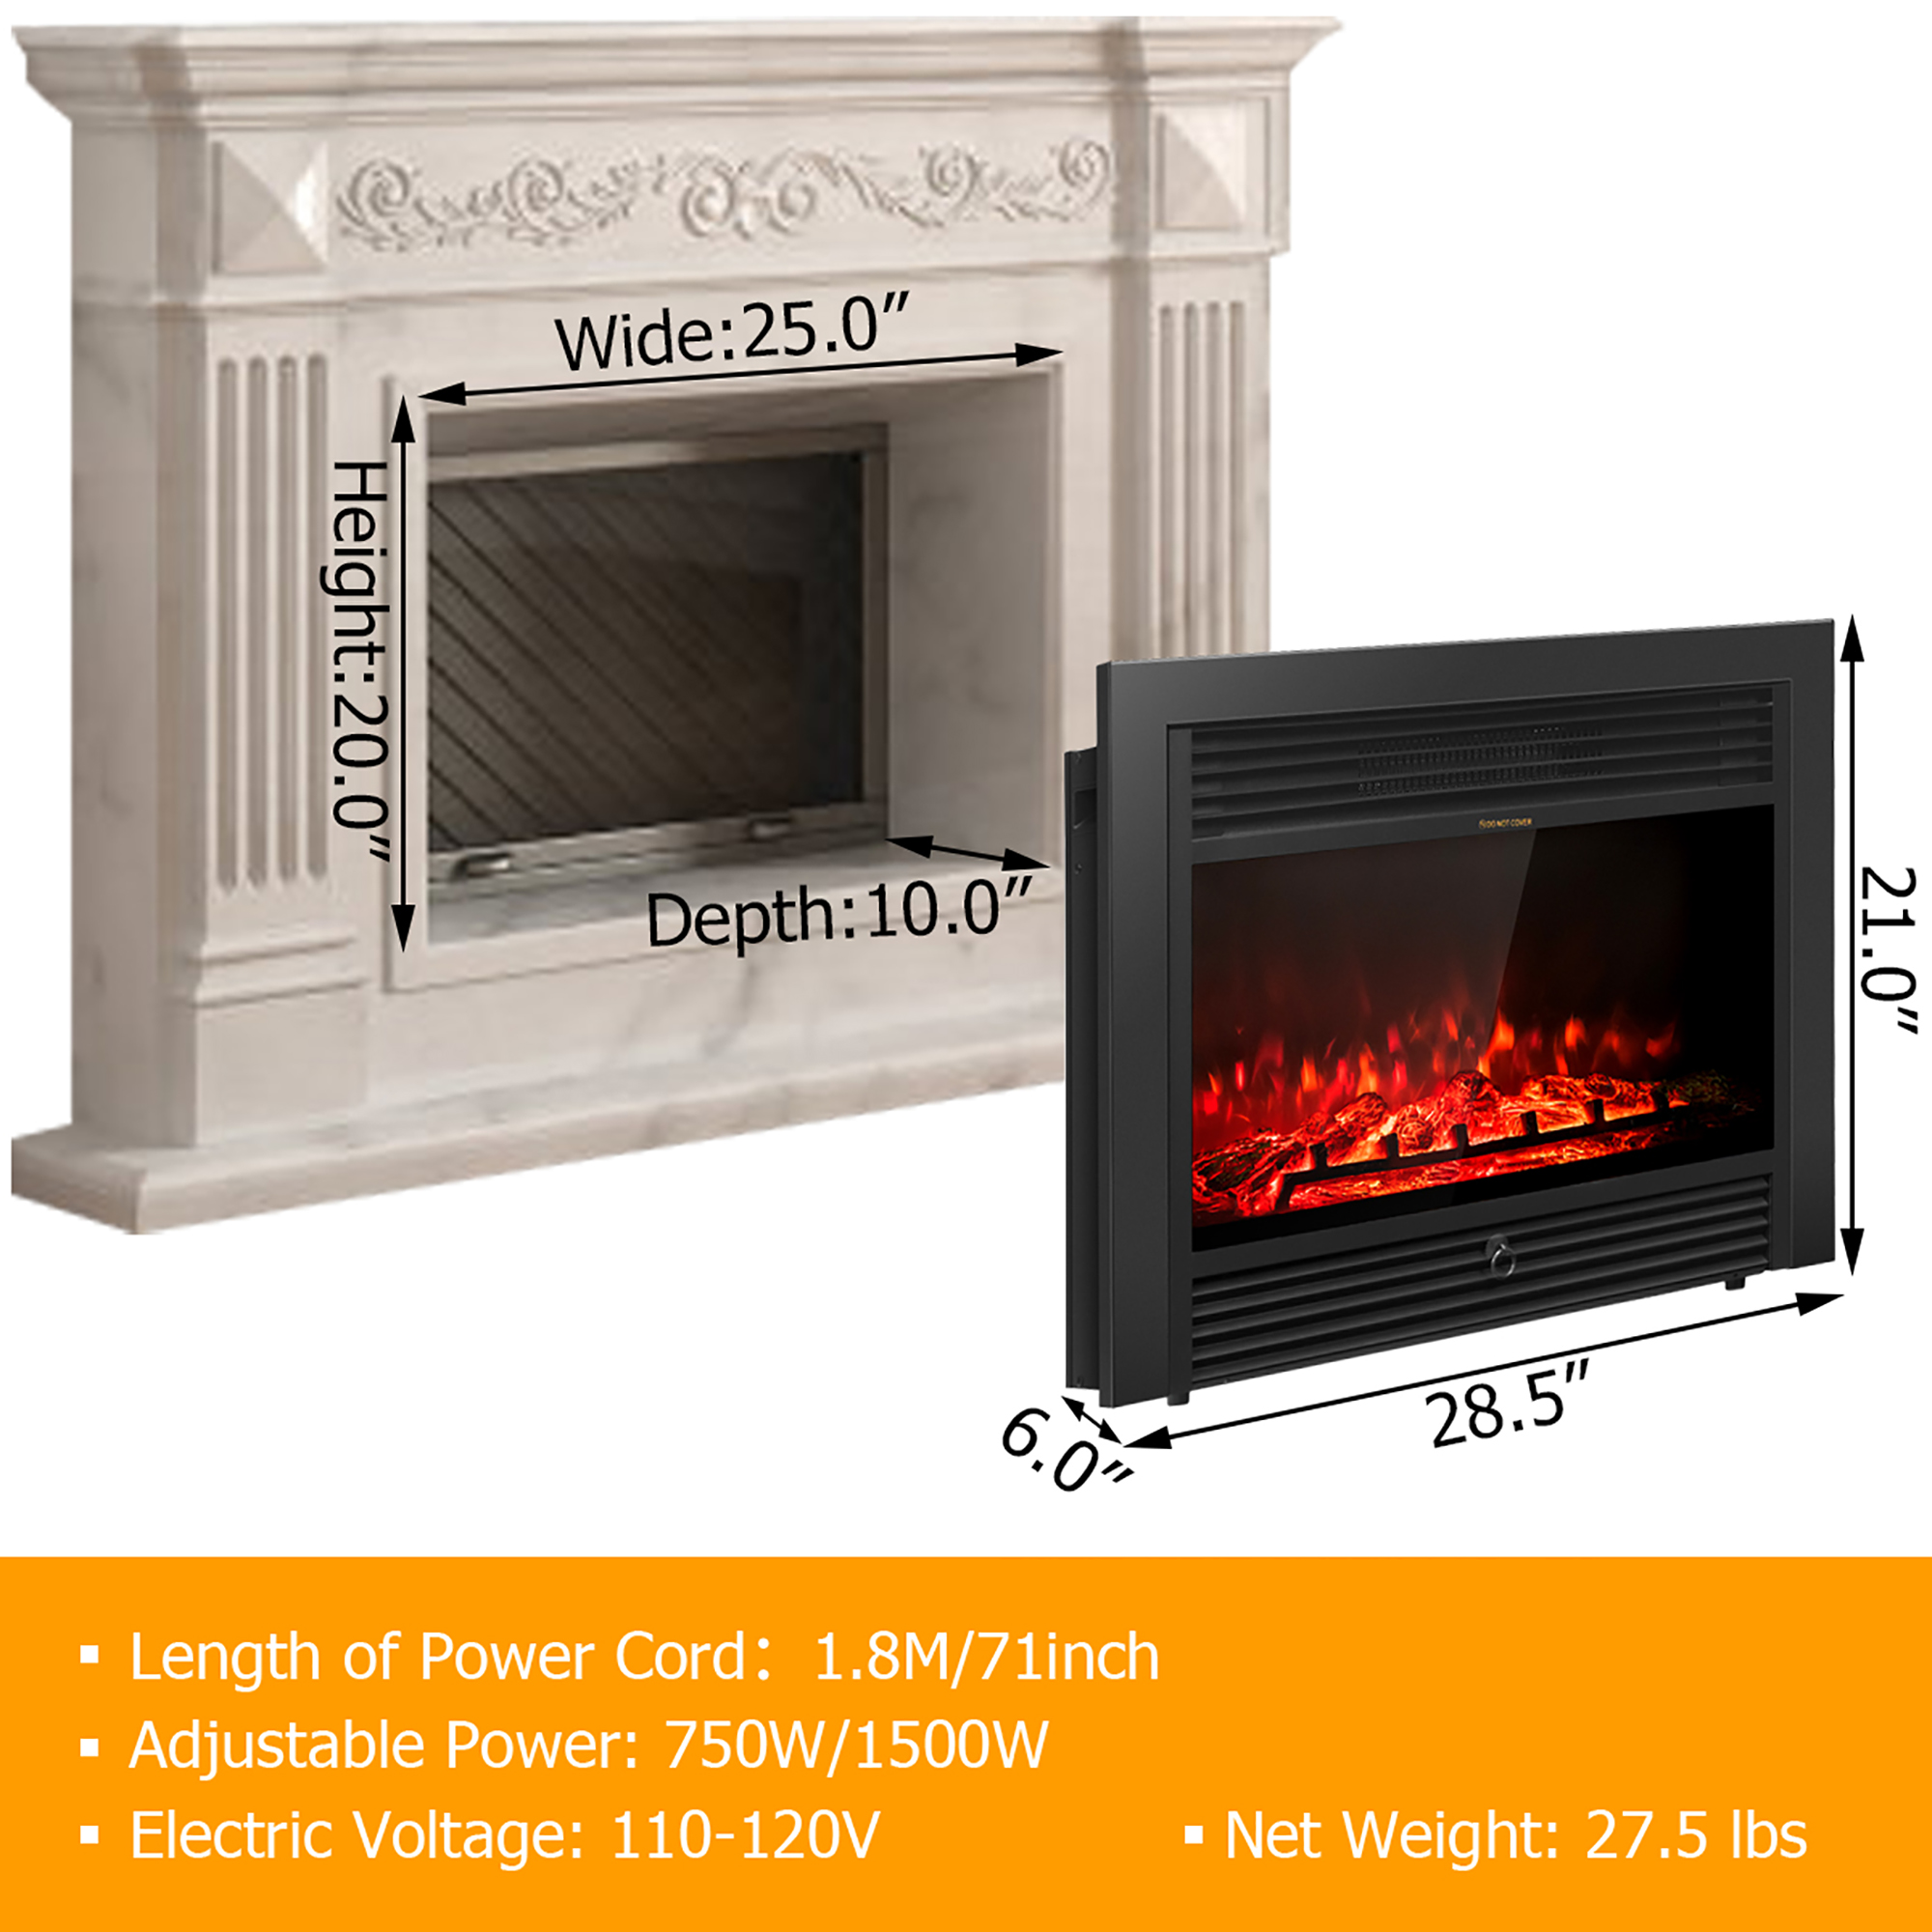 Costway 28.5" Fireplace Electric Embedded Insert Heater Glass Log Flame Remote - image 2 of 10